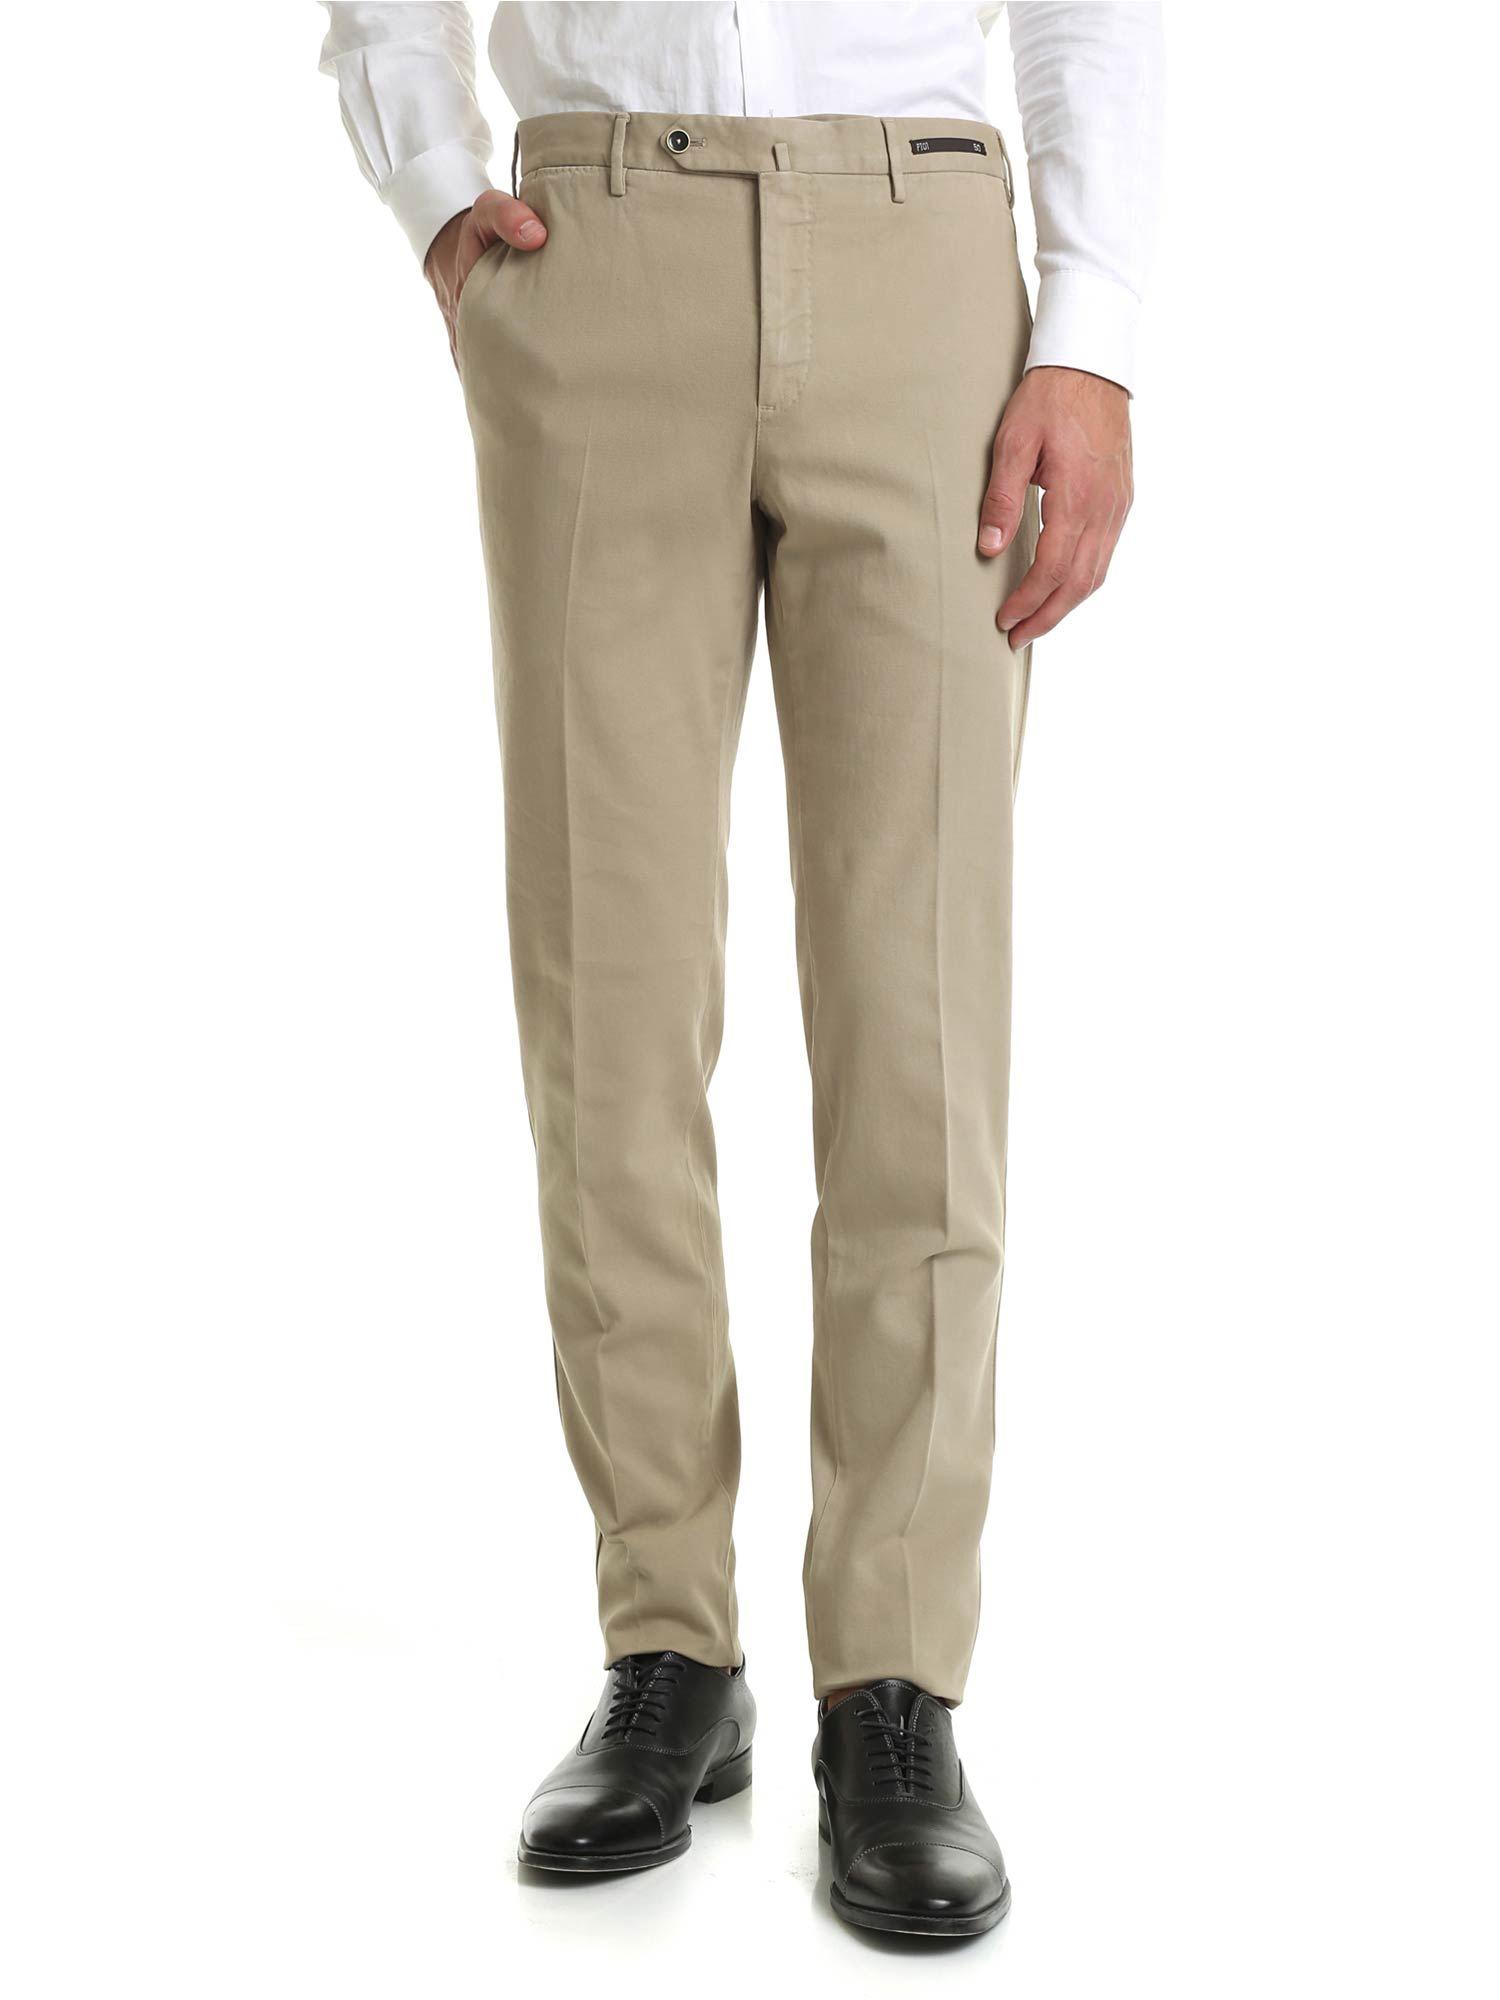 PT01 Textured Fabric Trousers In Beige in Natural for Men - Lyst